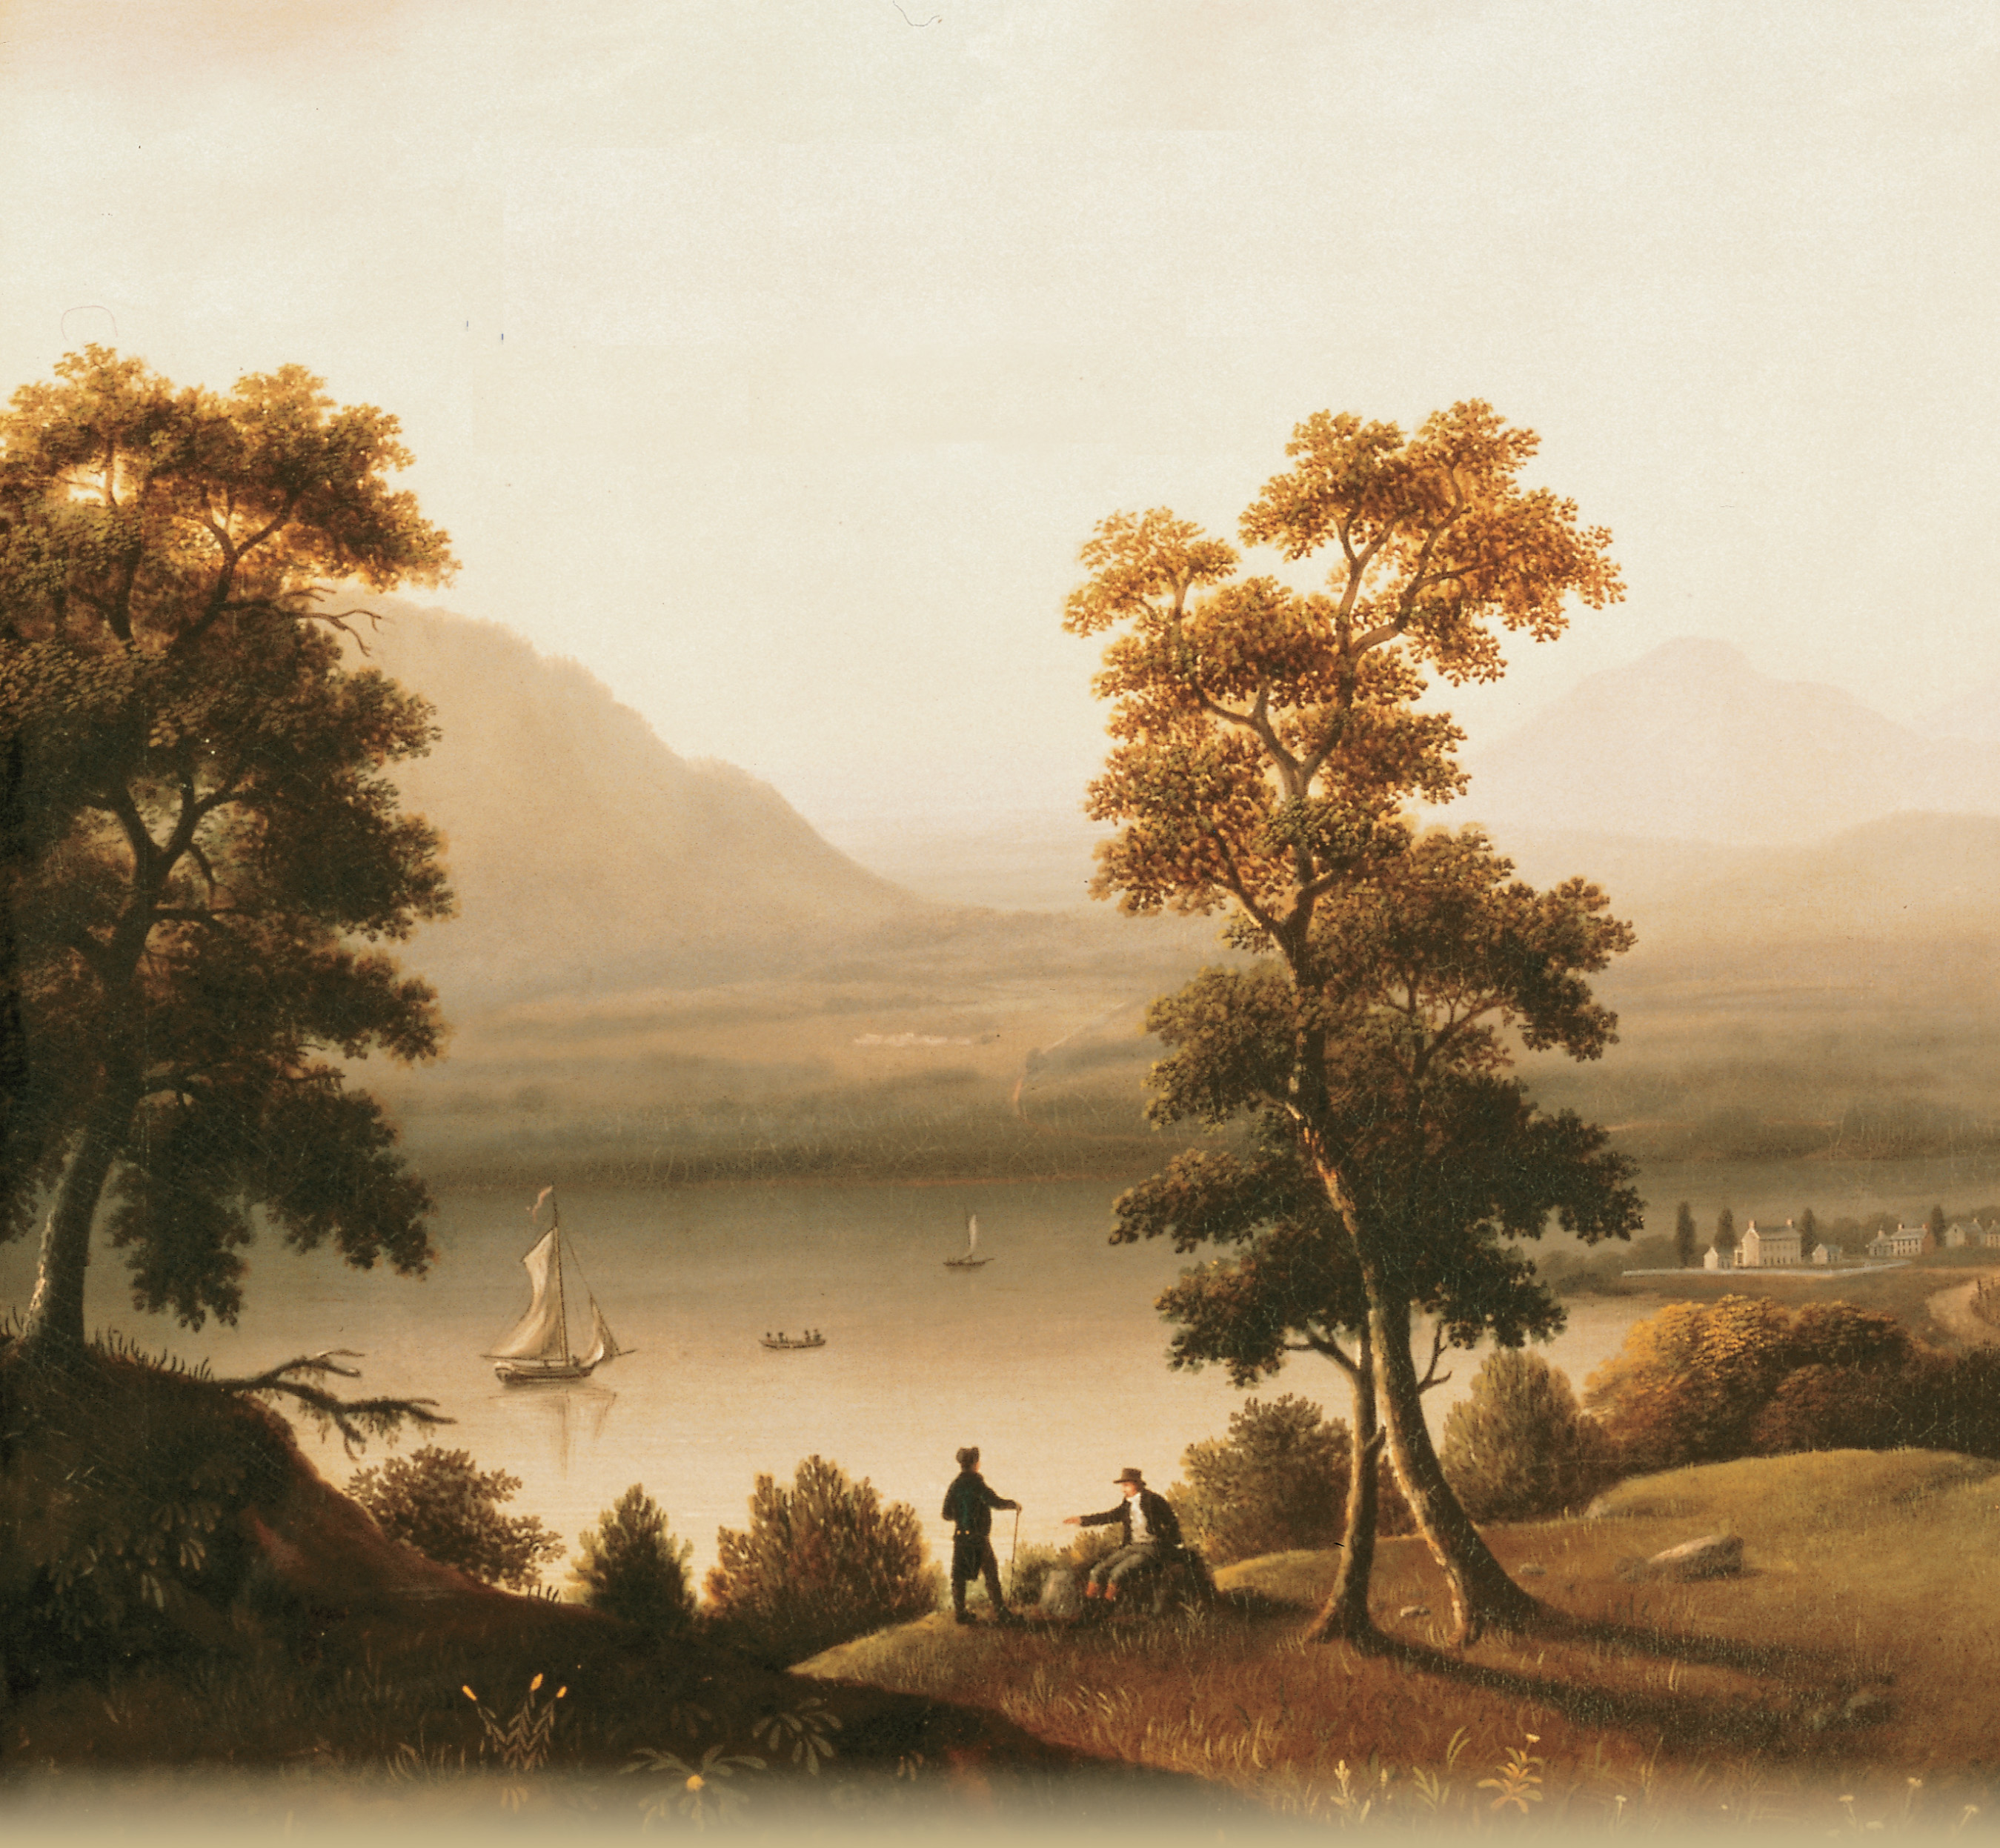 A painting shows a misty lake
surrounded by trees and mountains.